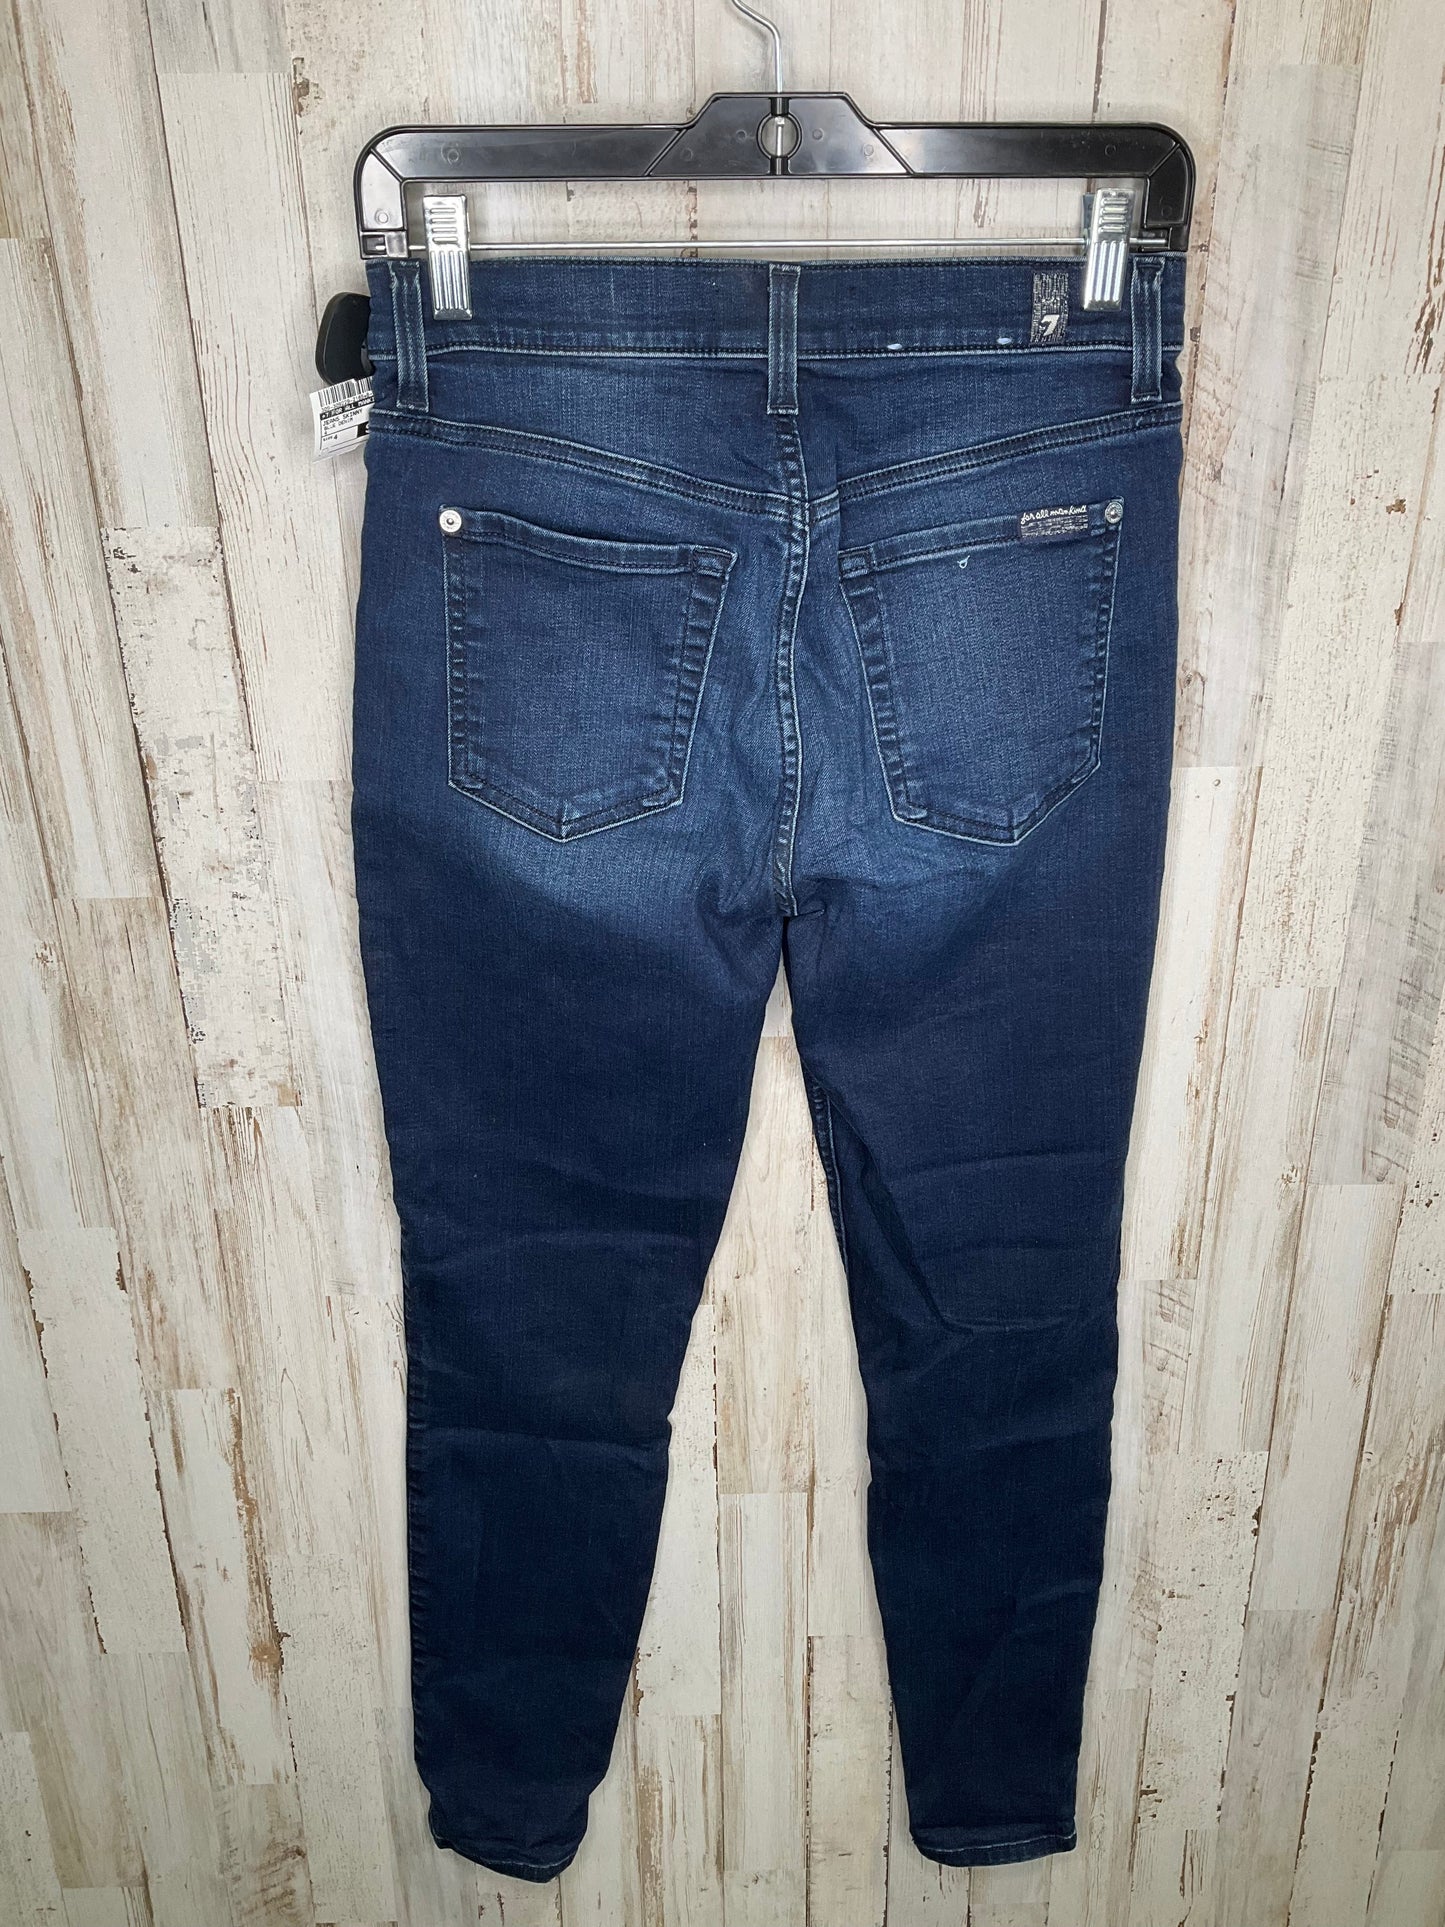 Jeans Skinny By 7 For All Mankind  Size: 4